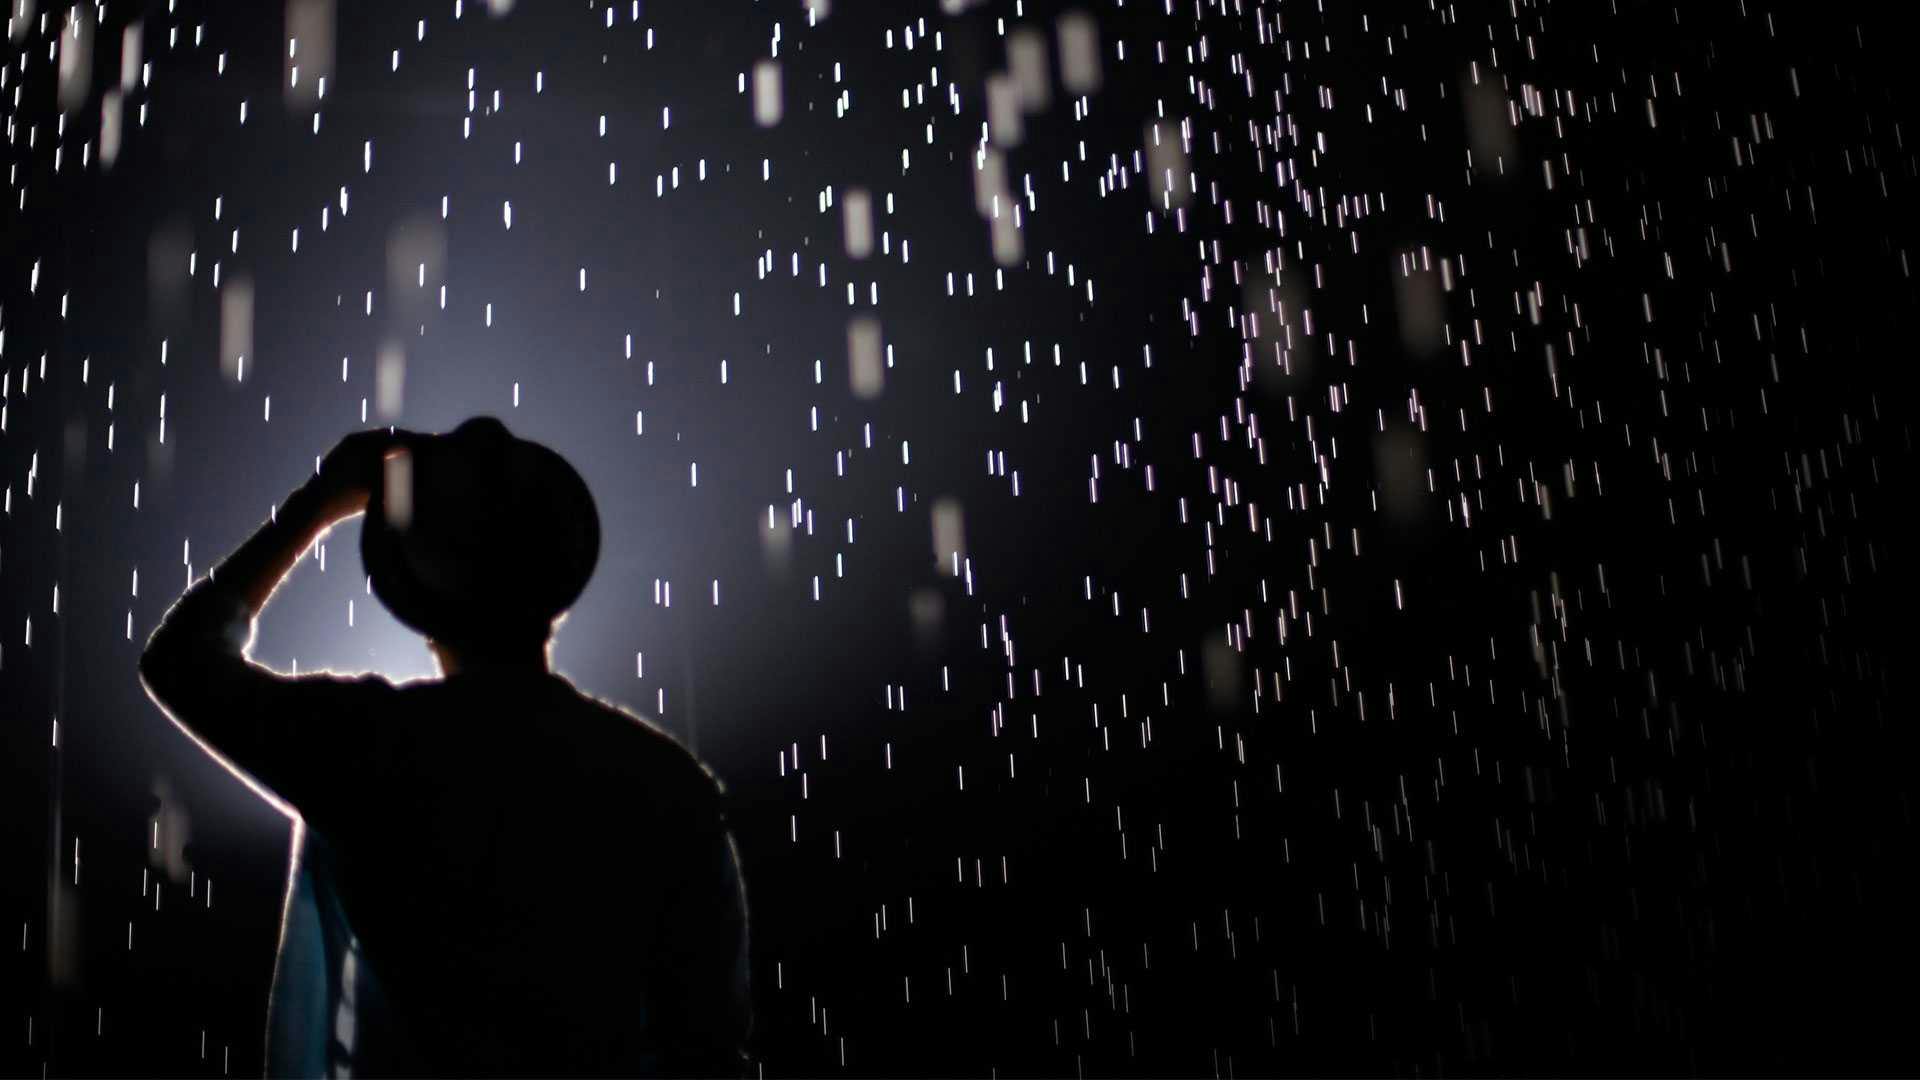 A dark picture with visible rain drops while a person is holding their hat in place.